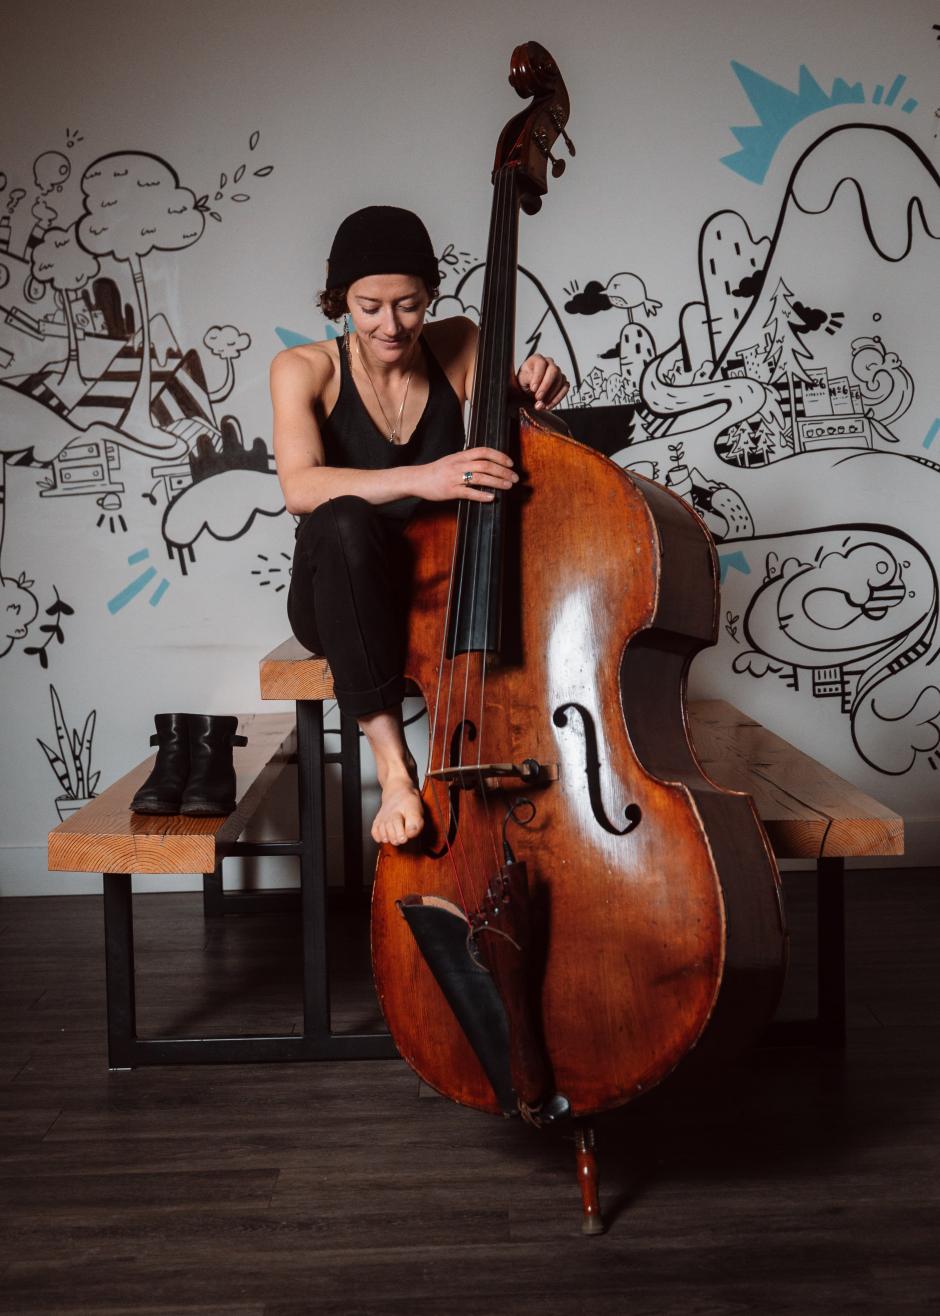 Jill sits in front of a white wall with black drawing art on the wall. She plays an upright base and wears a black toque. 